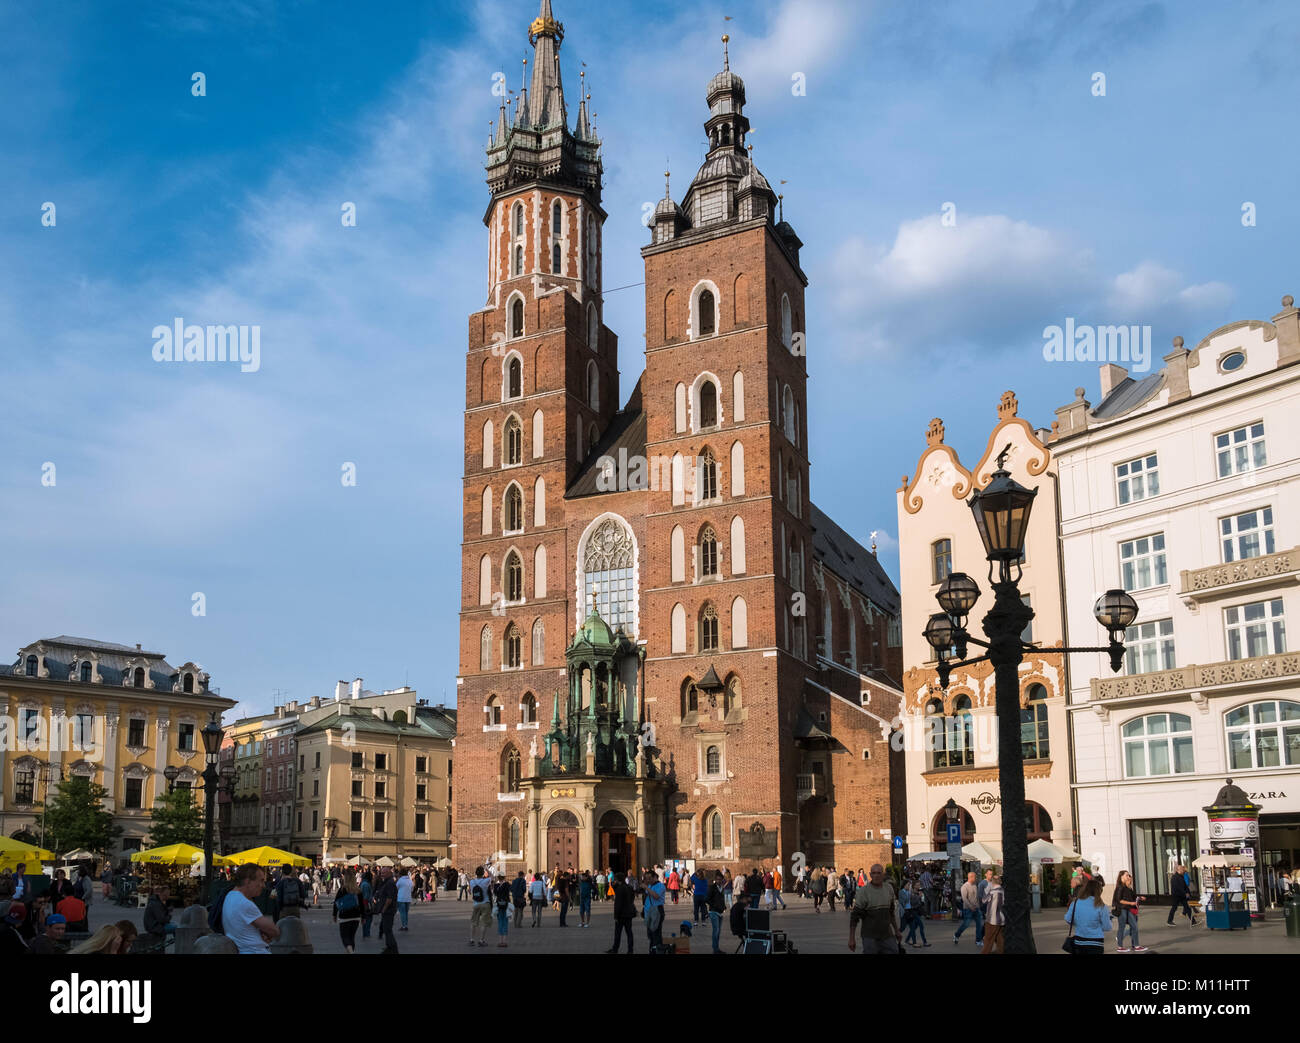 Old Town Krakow High Resolution Stock Photography and Images - Alamy